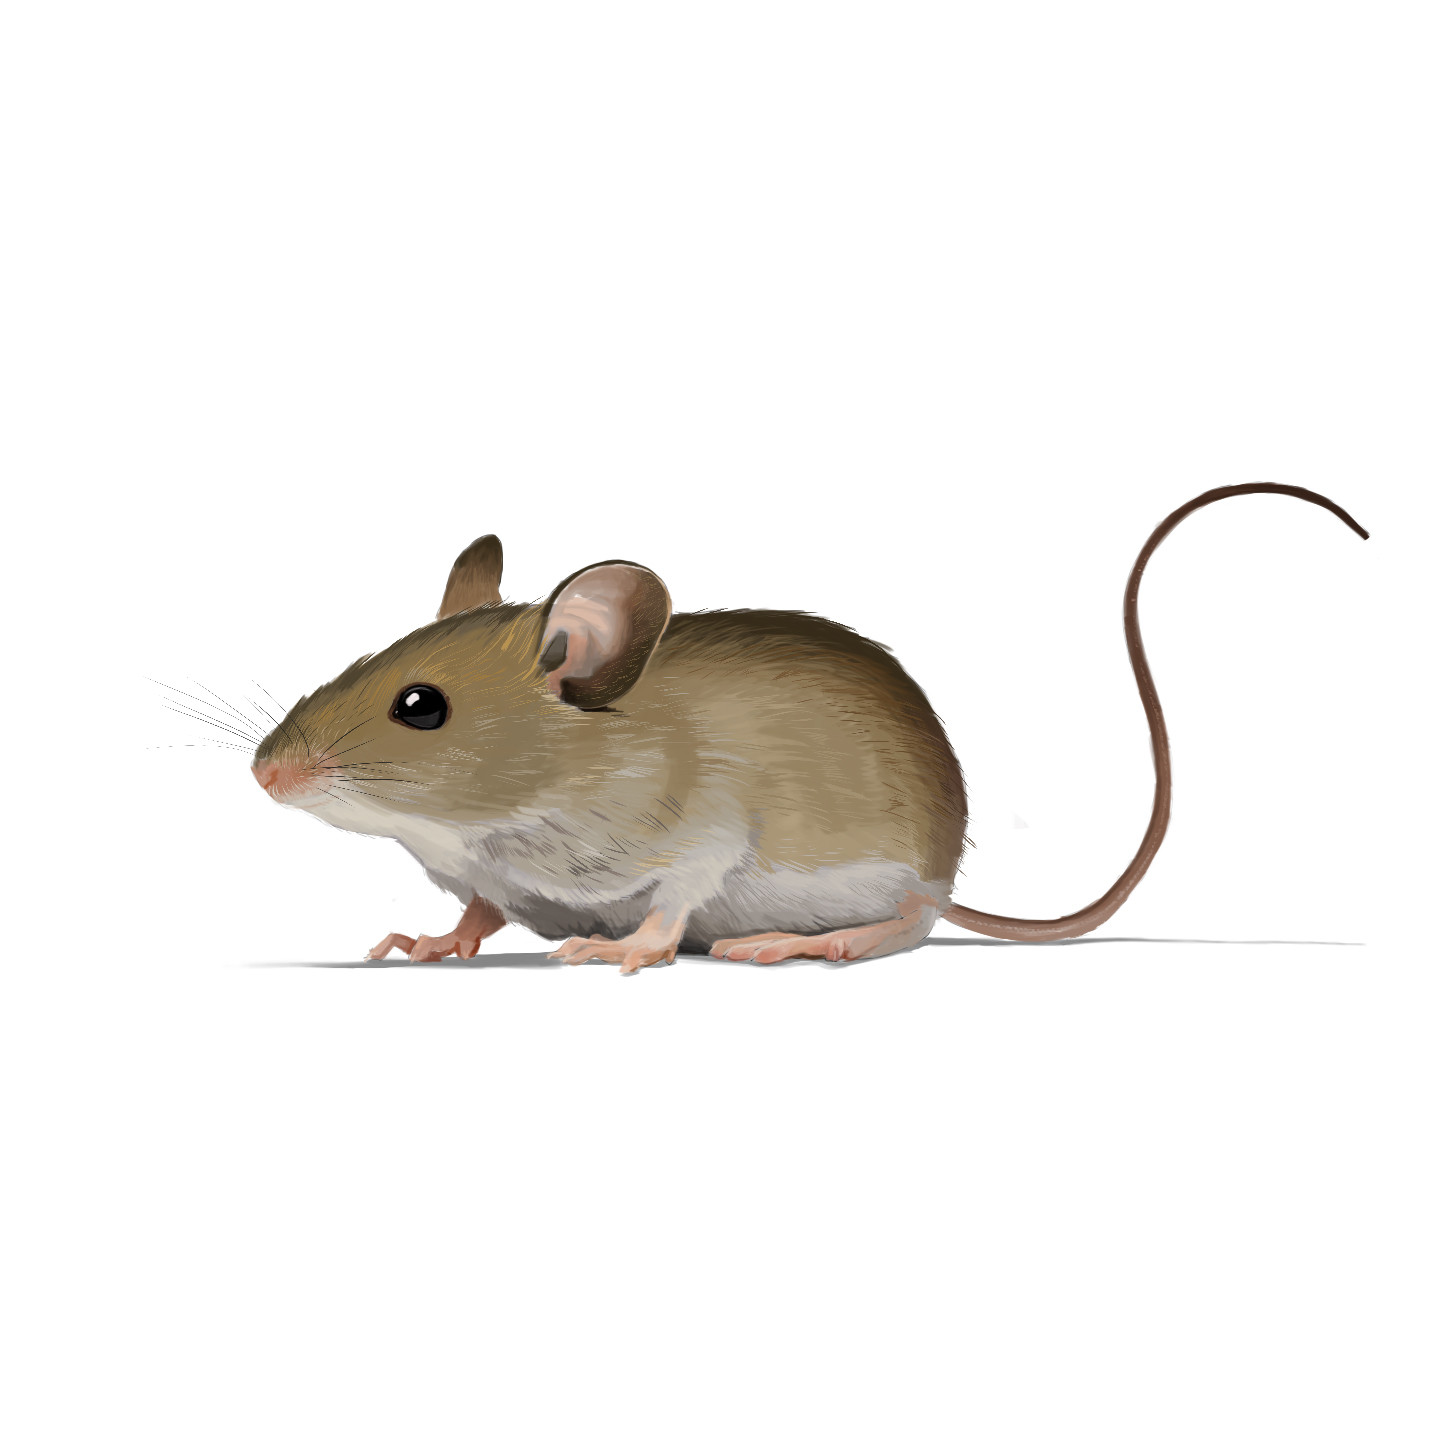 Illustration of House Mouse